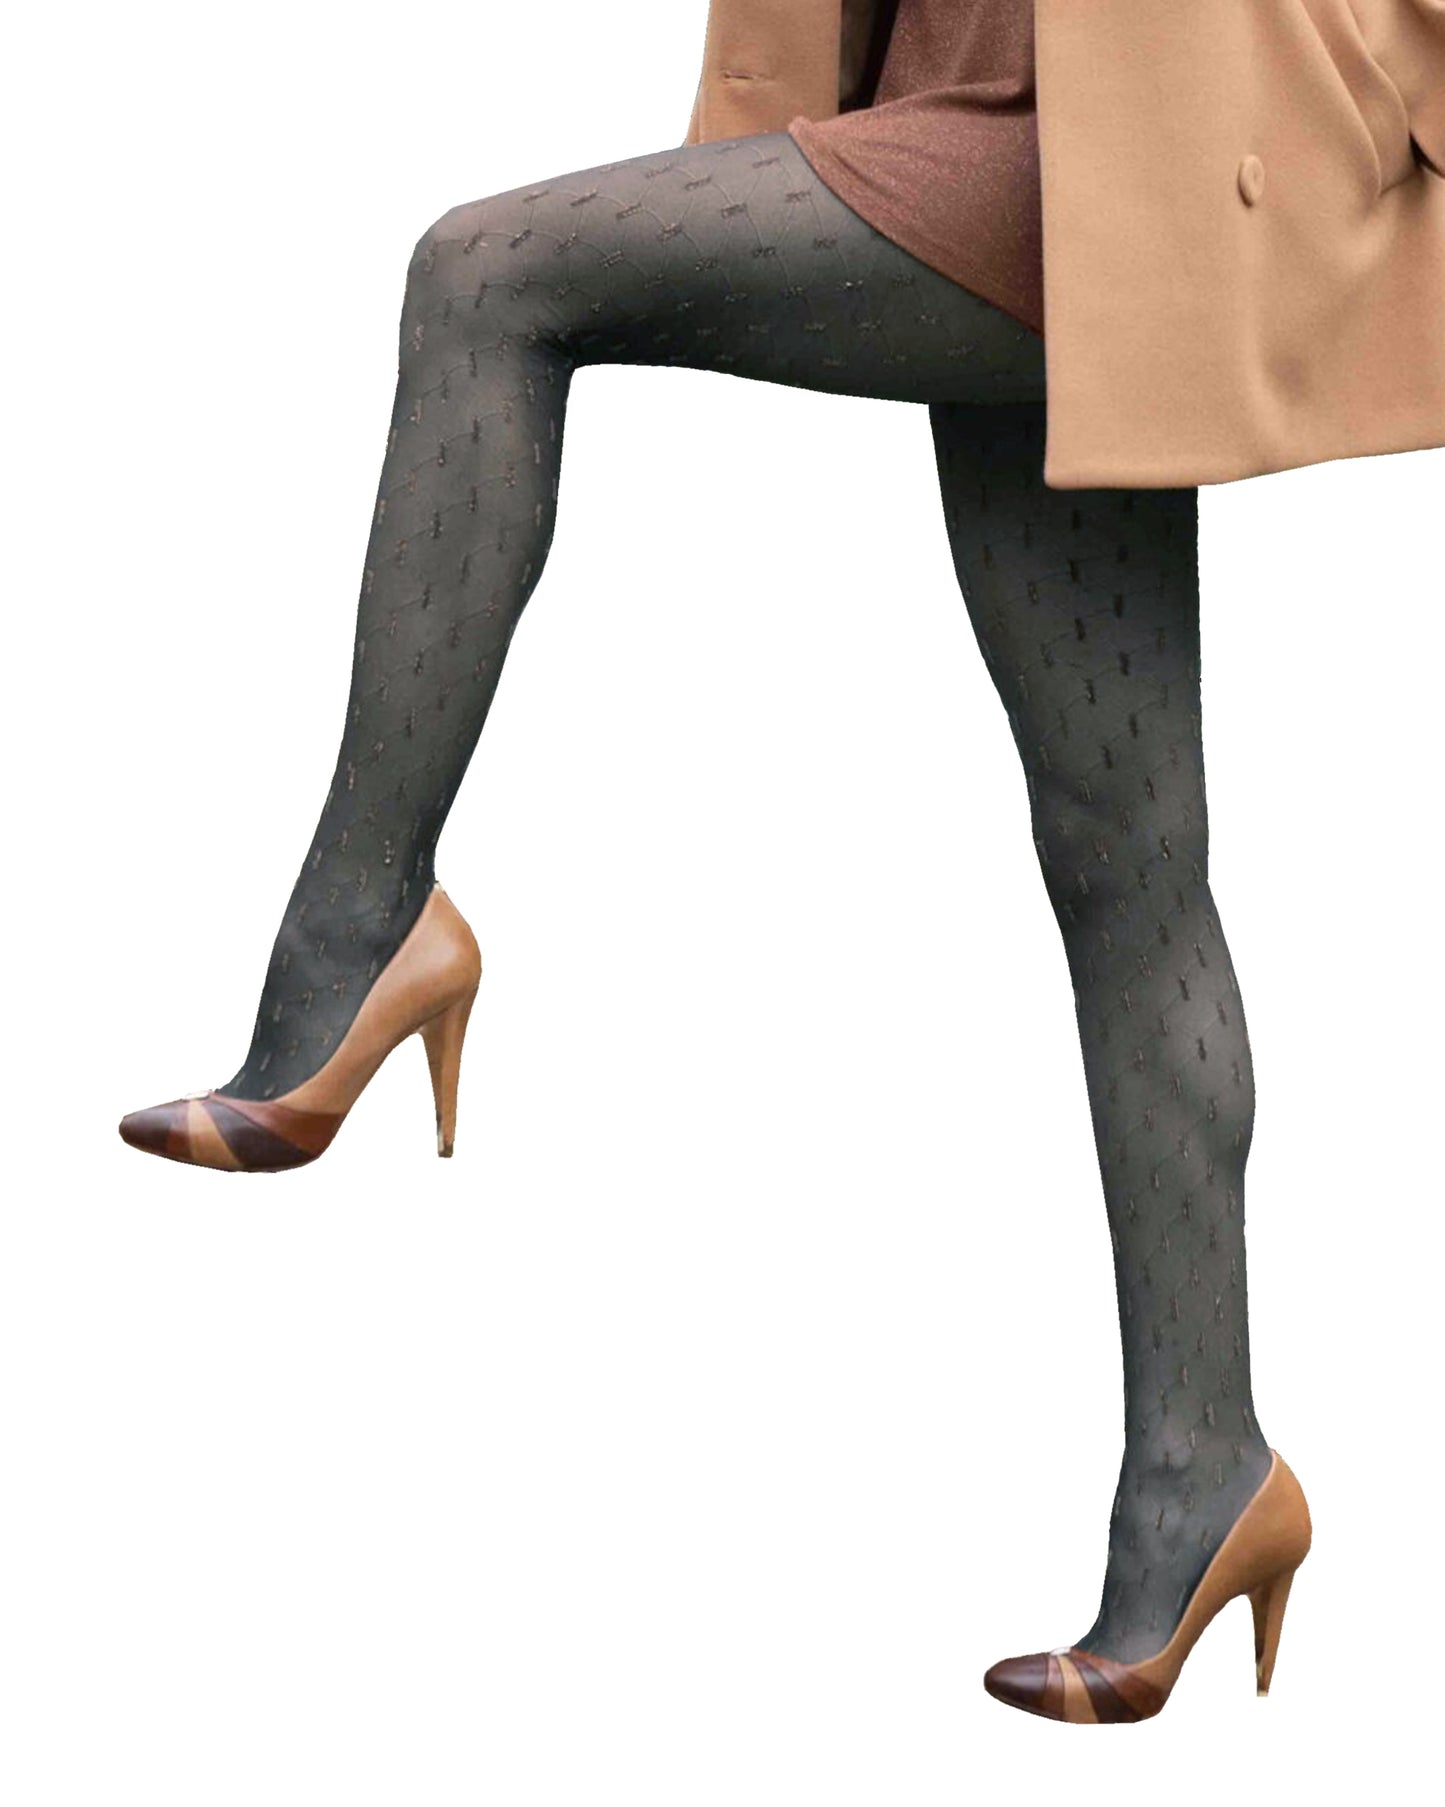 Omero Brilliant Collant - Sheer black fashion tights with a honeycomb style pattern with silver lurex dotted lines, flat seams, gusset and soft comfort waistband.